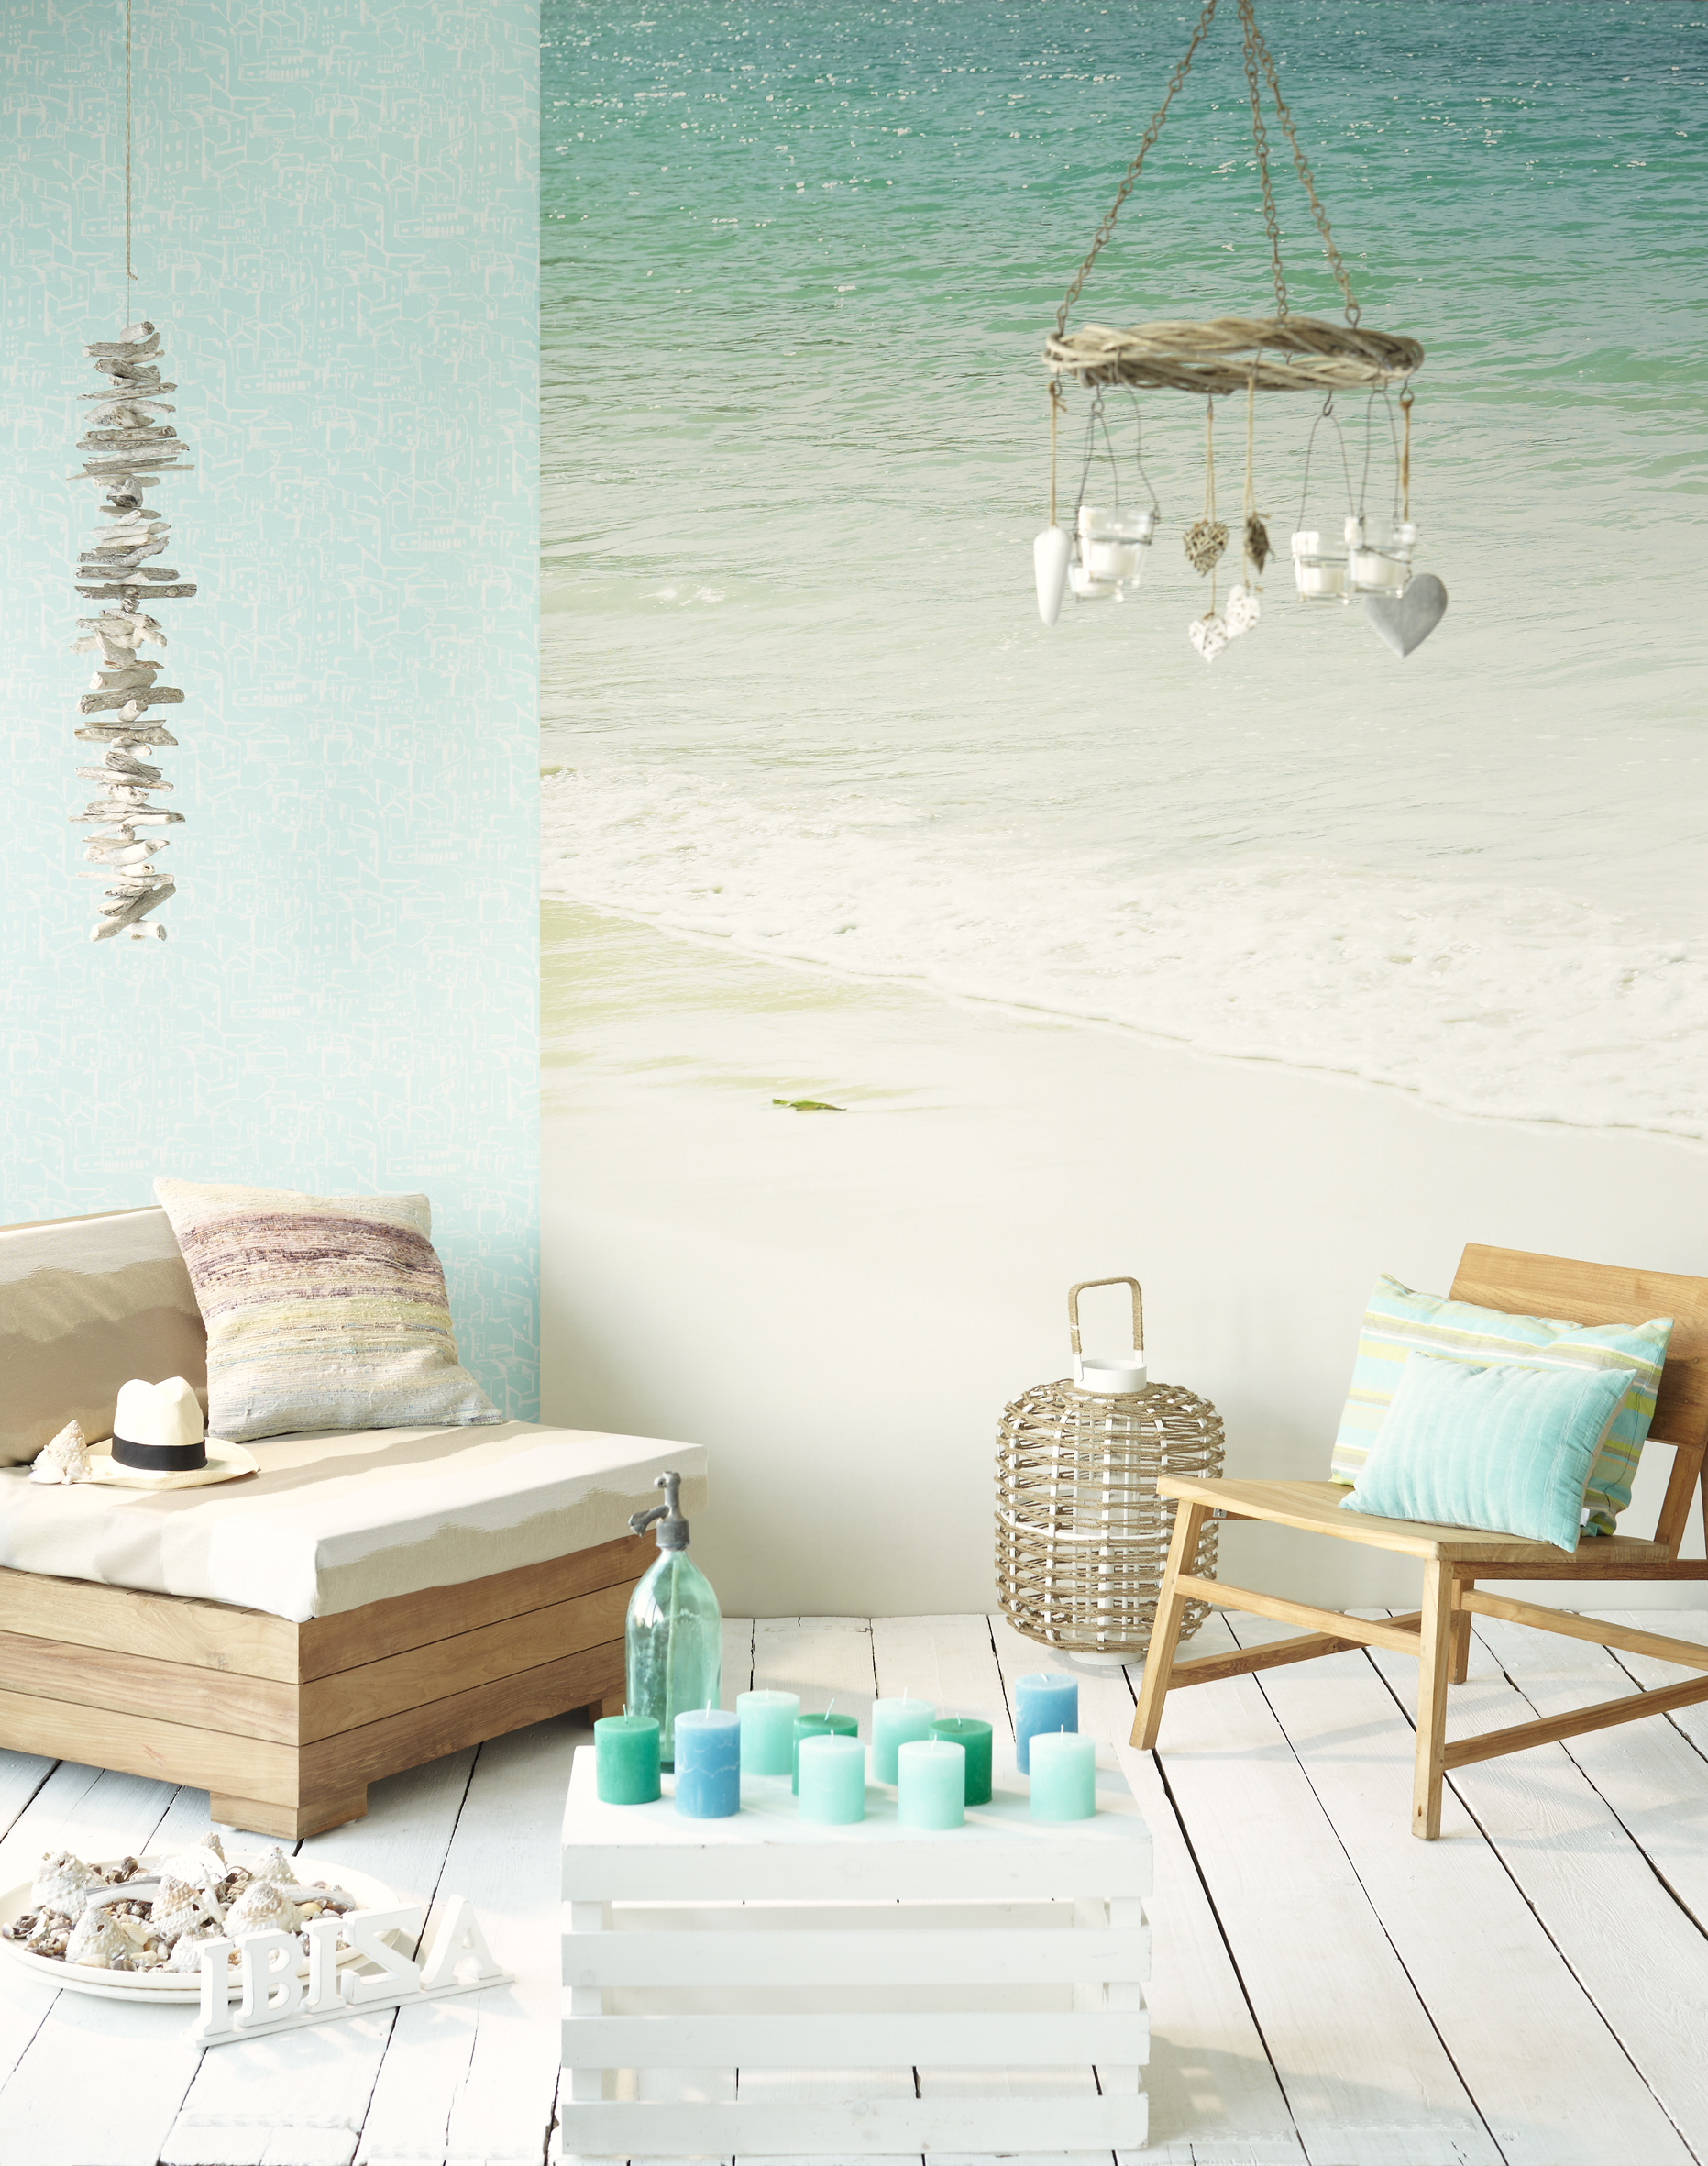 La Playa The Beach Wall Mural from Ibiza by Eijffinger Tropical Wallpaper Collection